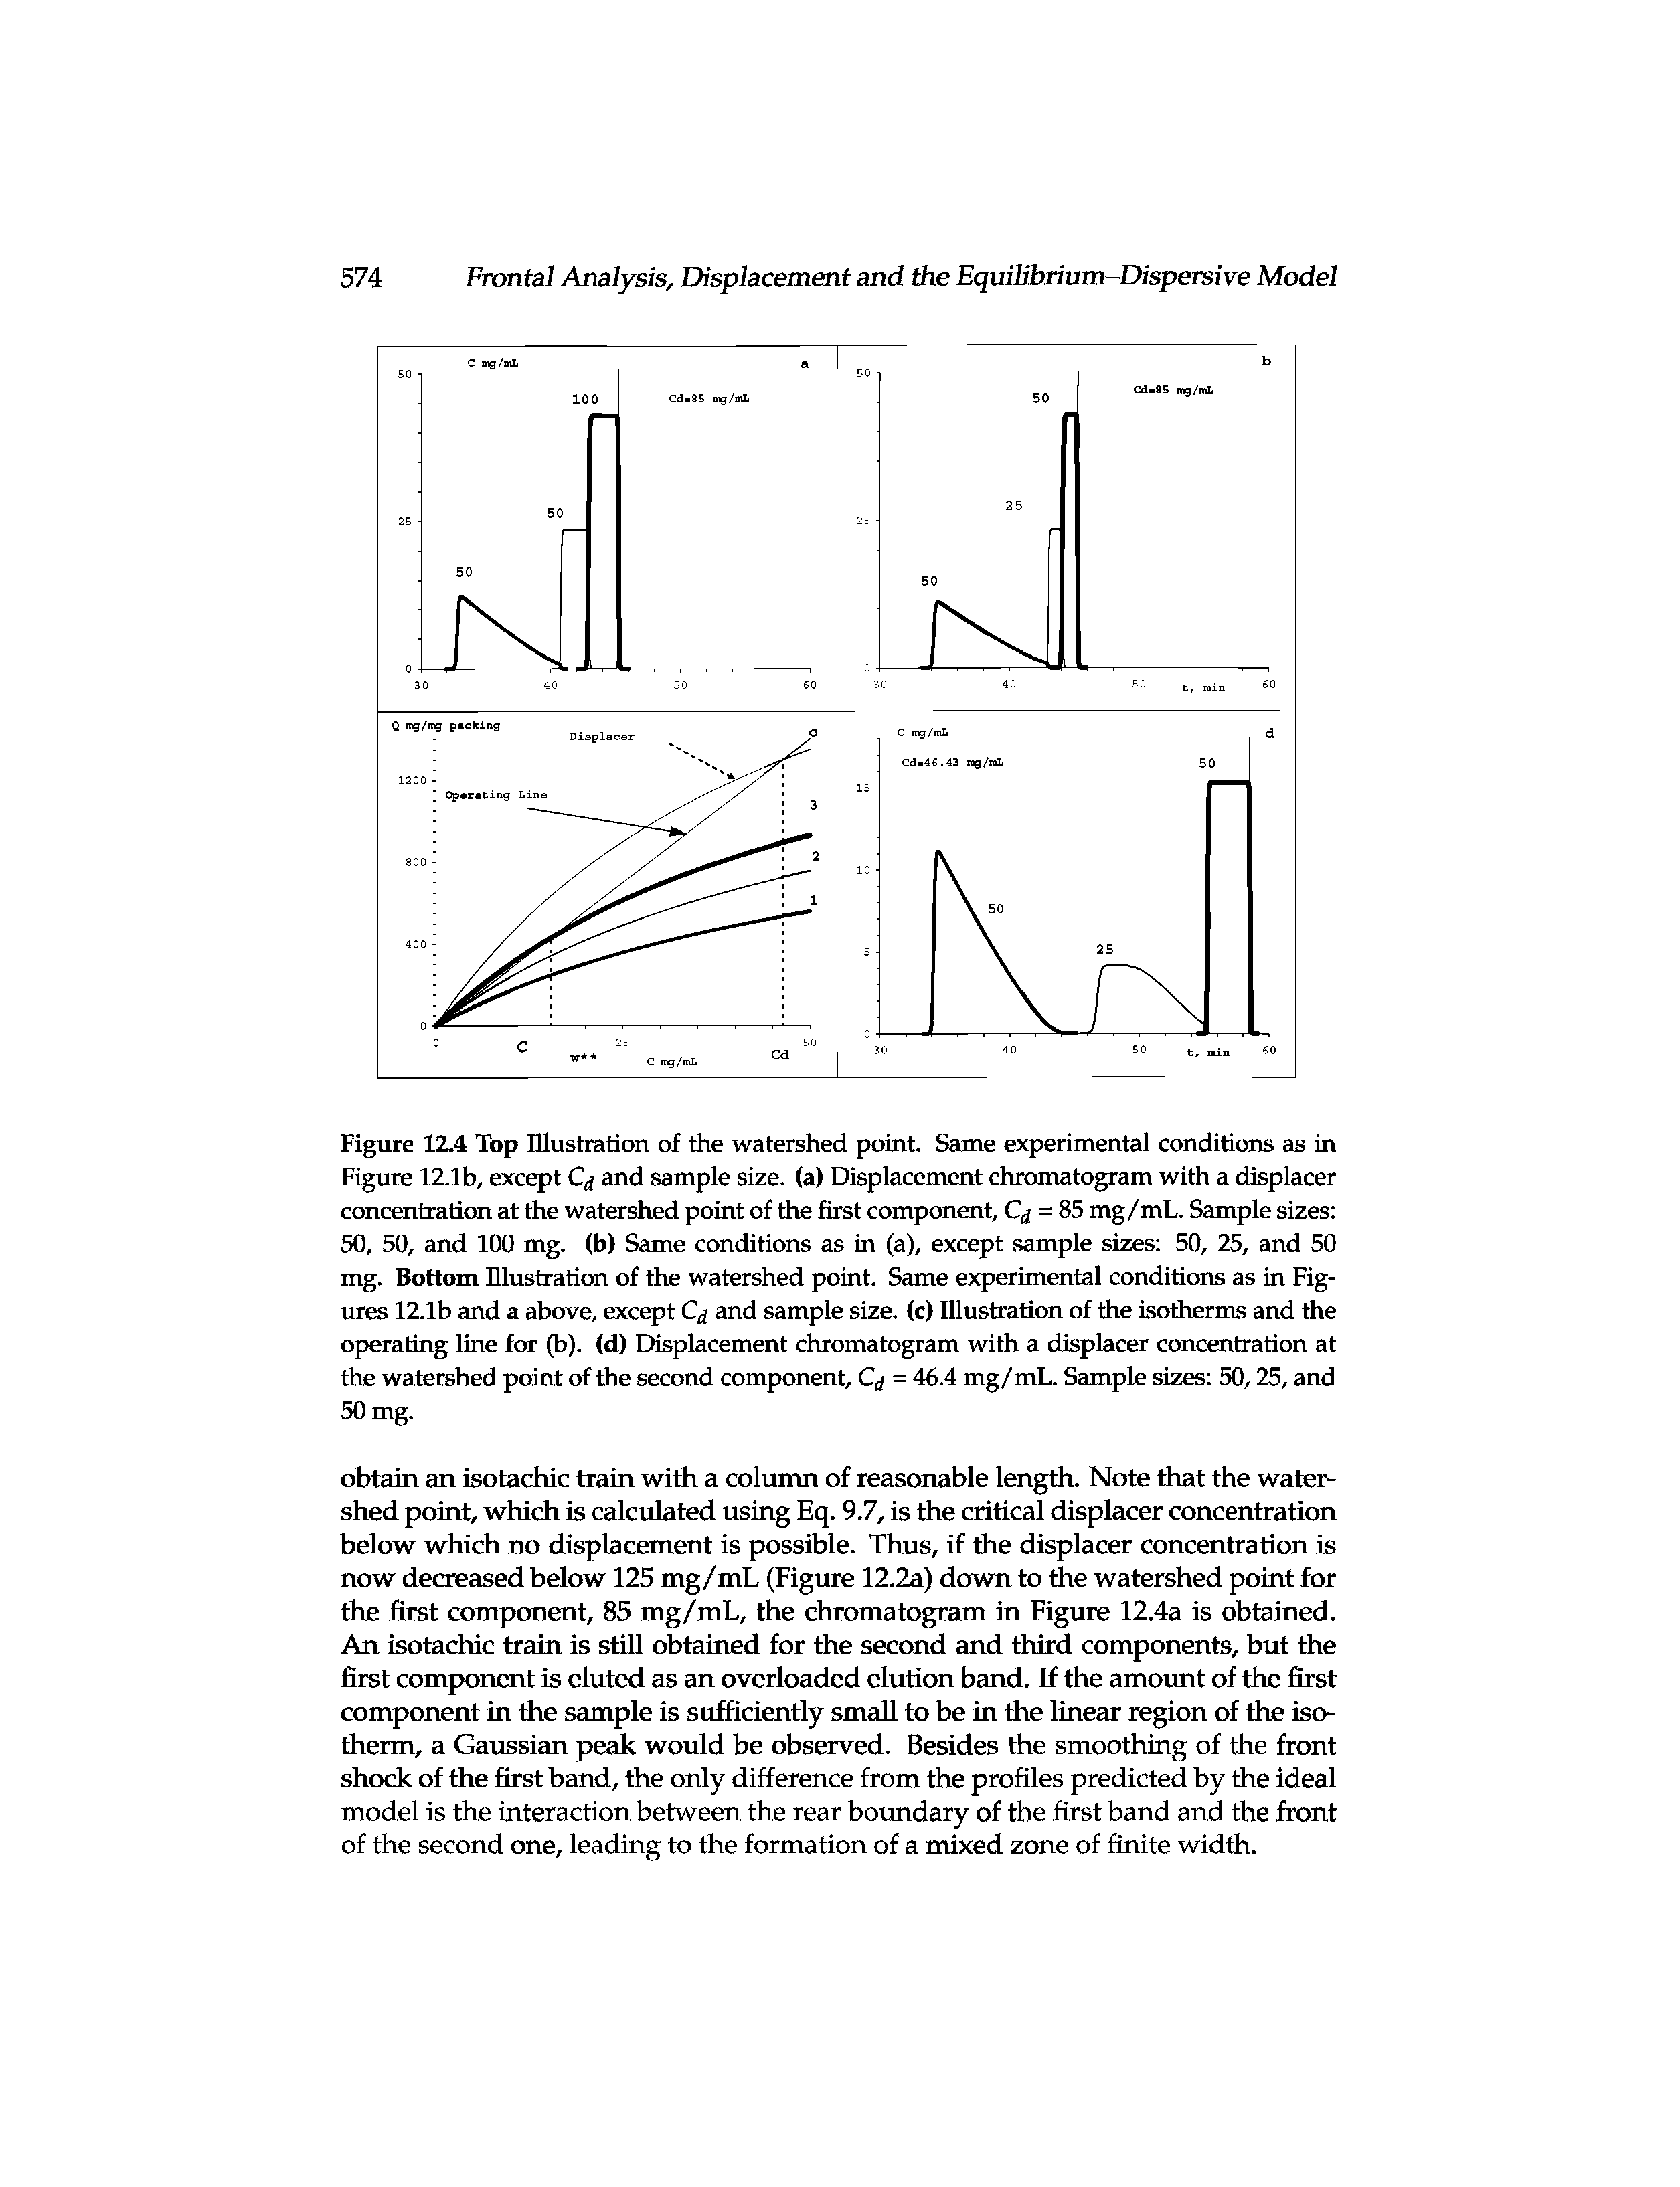 Figure 12.4 Top Illustration of the watershed point. Same experimental conditions as in Figxue 12.1b, except Q and sample size, (a) Displacement chromatogram with a displacer concentration at the watershed point of the first component, Q = 85 mg/mL. Sample sizes 50, 50, and 100 mg. (b) Same conditions as in (a), except sample sizes 50, 25, and 50 mg. Bottom Illustration of the watershed point. Same experimental conditions as in Figures 12.1b and a above, except Q and sample size, (c) Illustration of the isotherms and the operating fine for (b). (d) Displacement chromatogram with a displacer concentration at the watershed point of the second component, Q = 46.4 mg/mL. Sample sizes 50,25, and 50 mg.